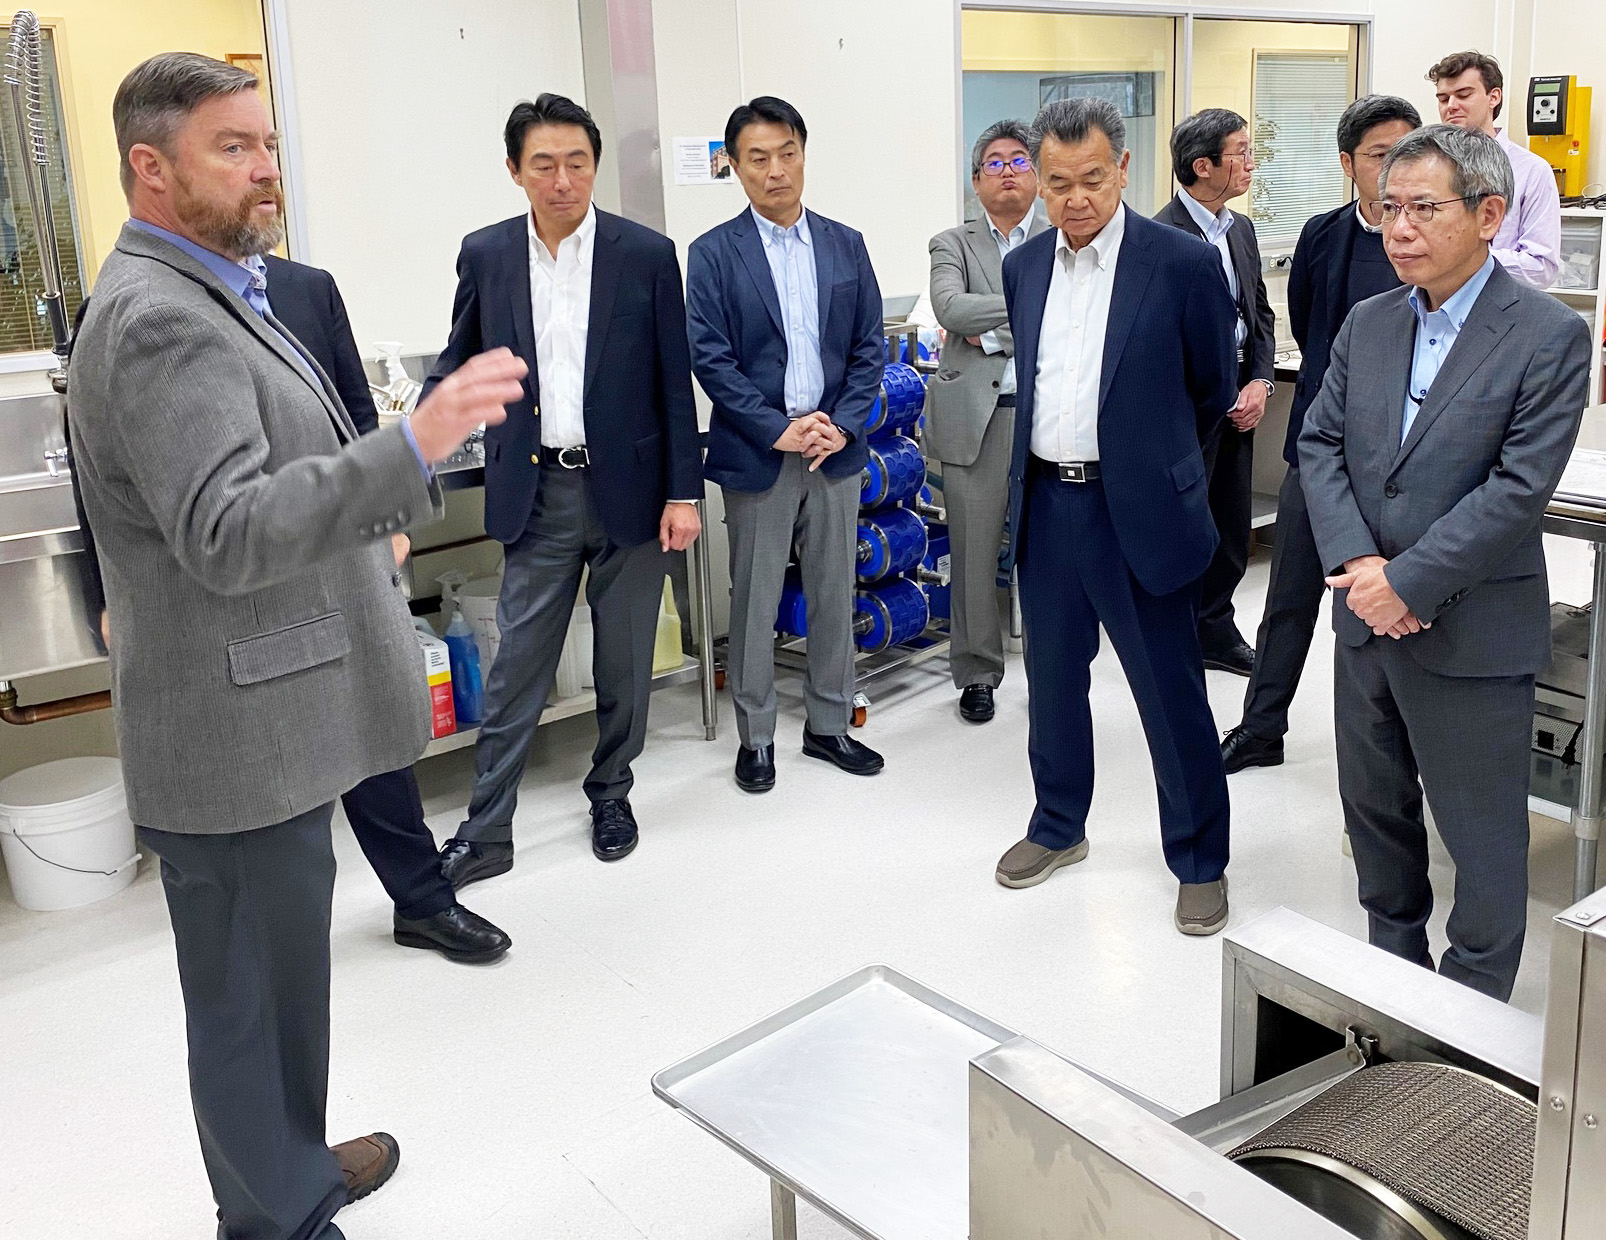 Mike Moran, Executive Director of the Wheat Marketing Center (WMC) in Portland, provides the team of Japanese flour millers with a tour of the WMC facility.